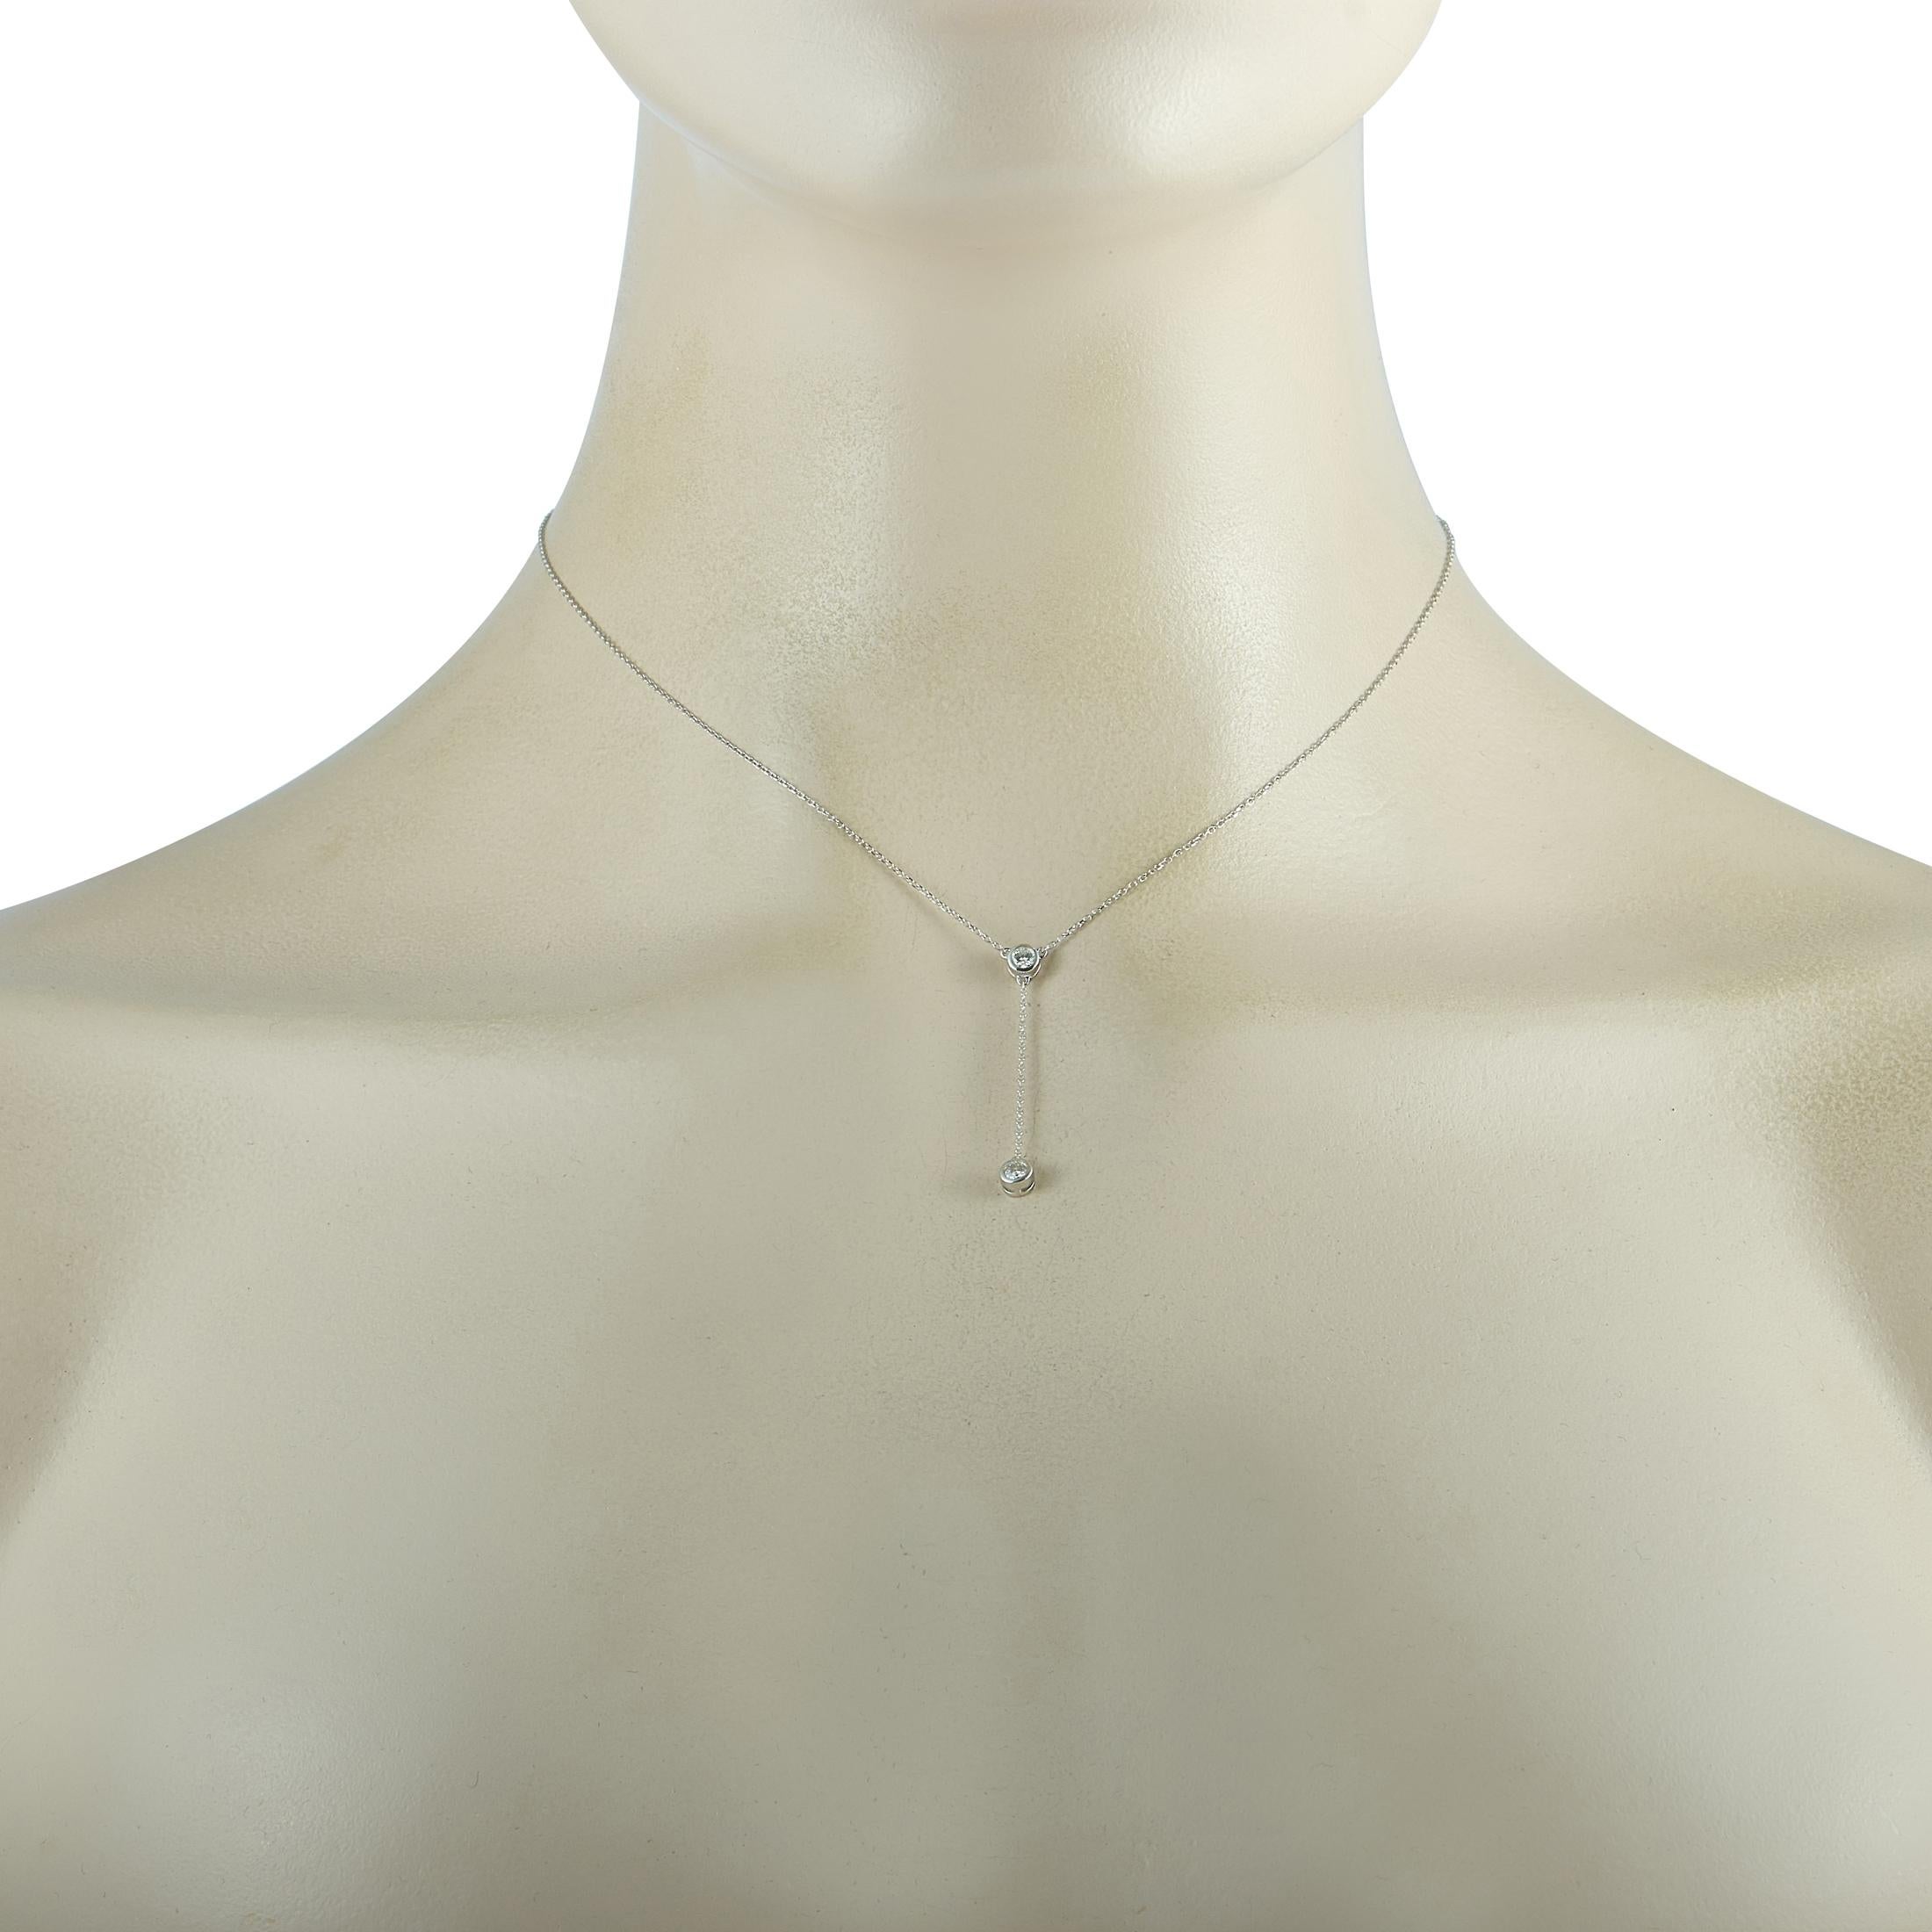 This LB Exclusive necklace is crafted from 14K white gold and weighs 1.7 grams. It is presented with a 15” chain and a pendant that measures 1.45” in length and 0.15” in width. The necklace is embellished with diamonds that total 0.20 carats.
 
